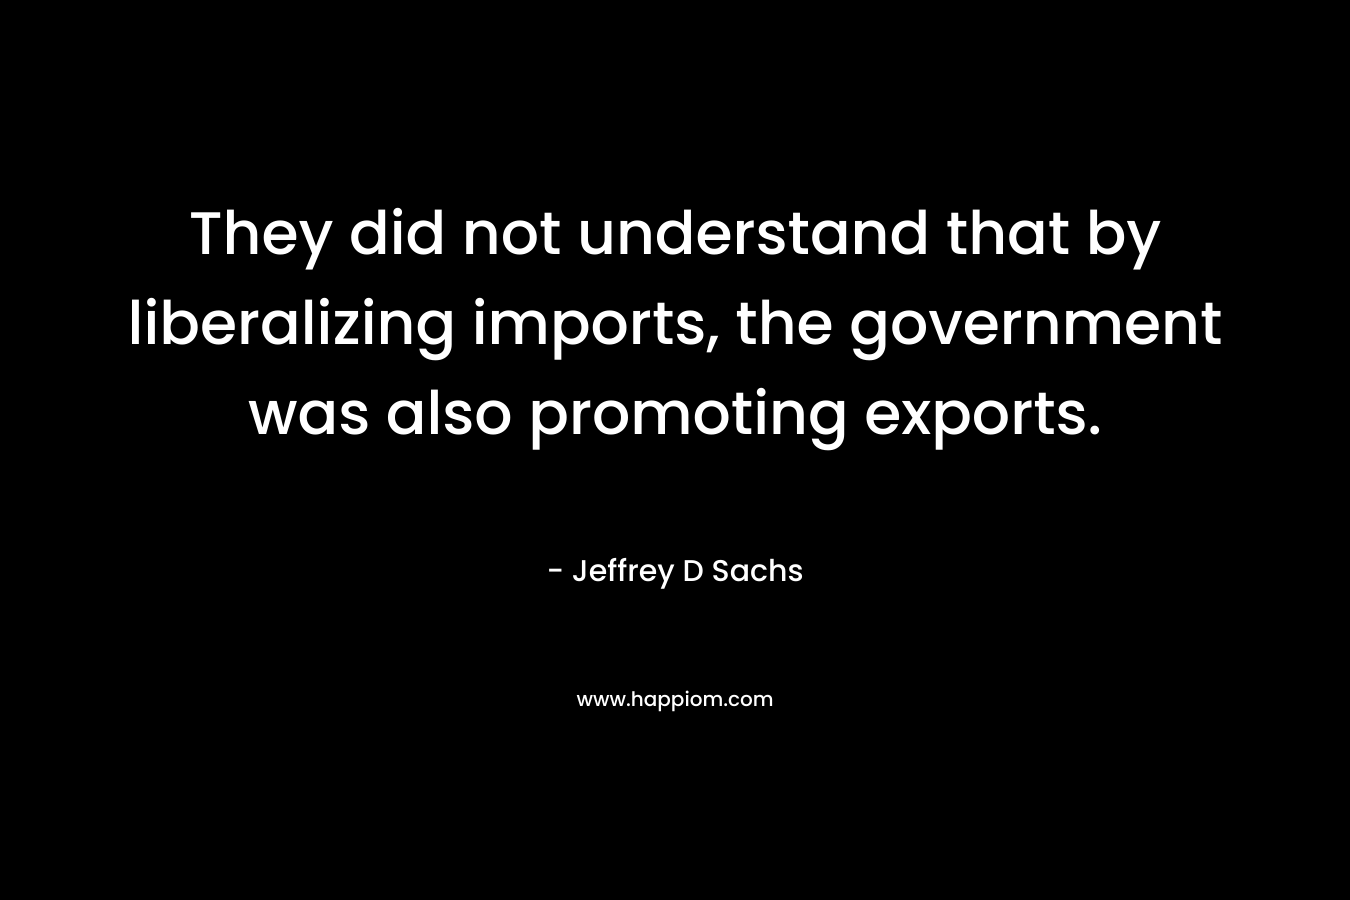 They did not understand that by liberalizing imports, the government was also promoting exports.